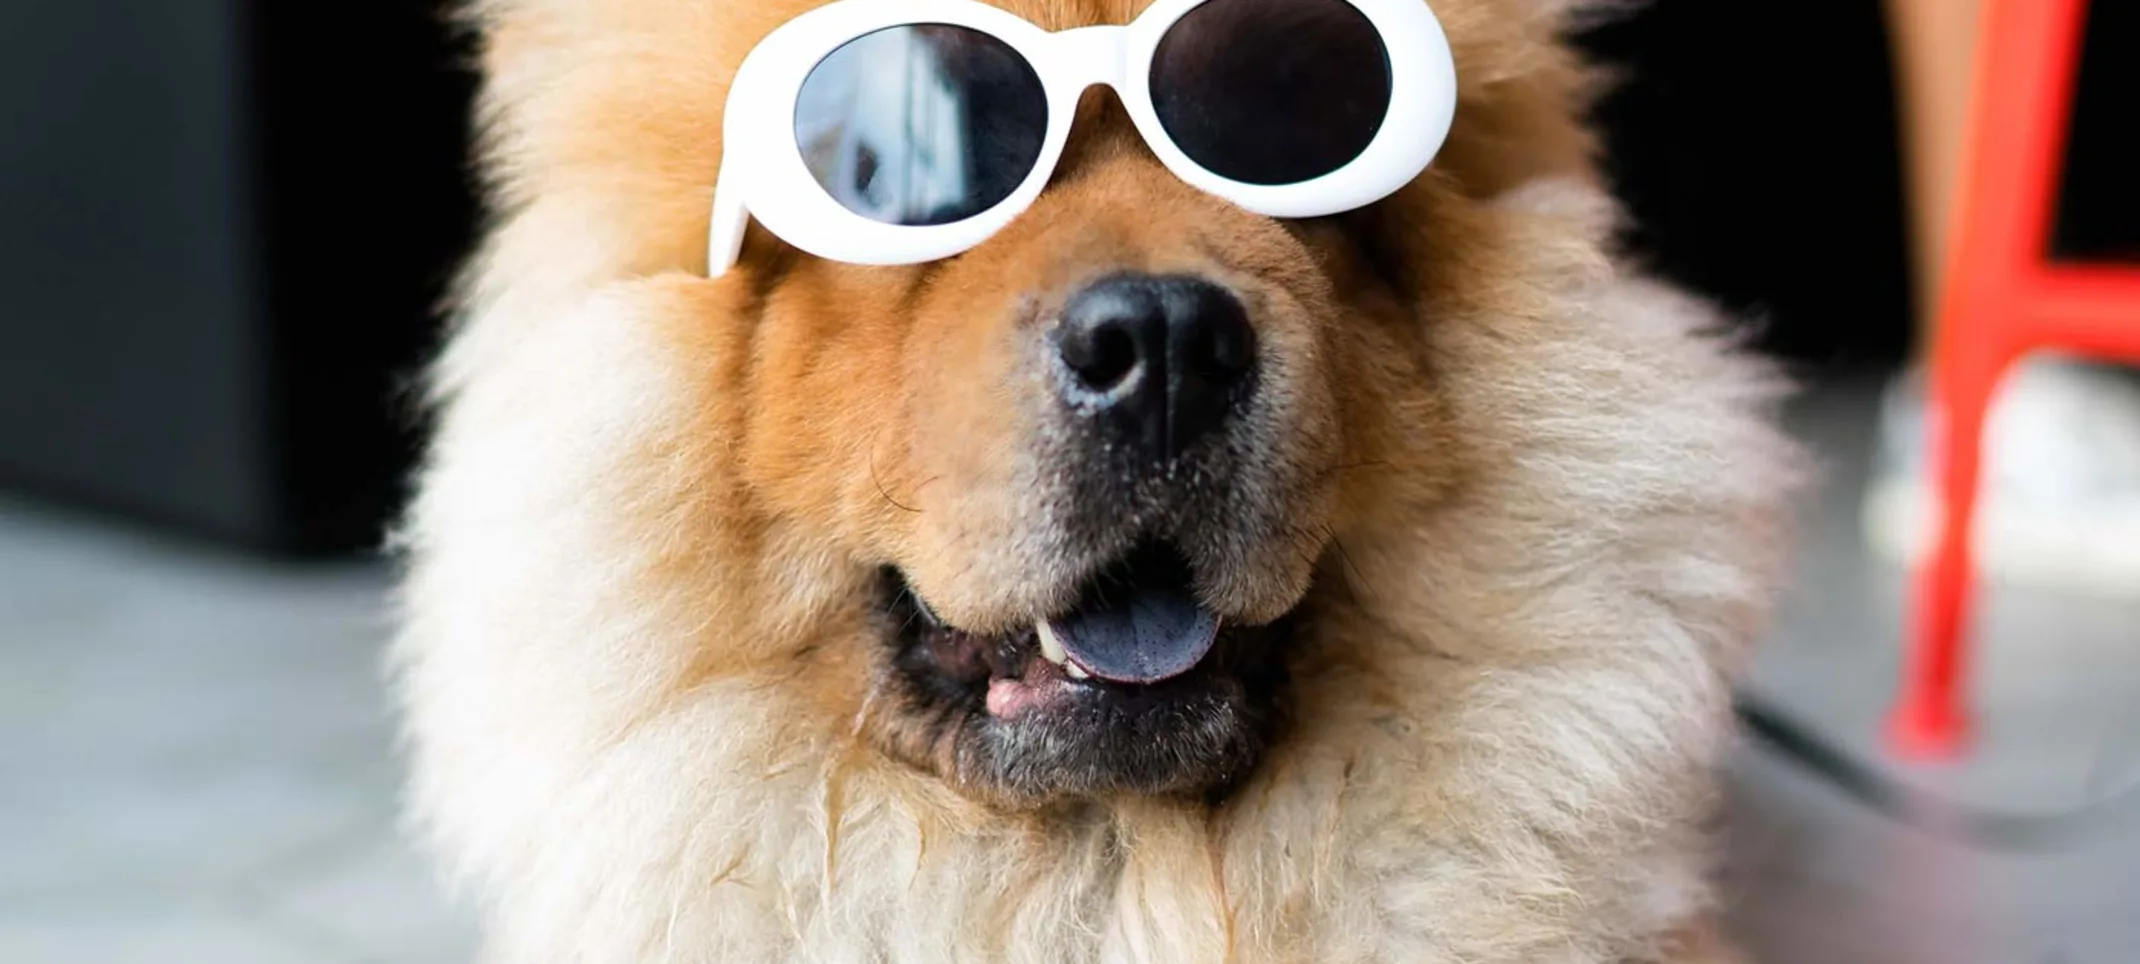 A fluffy brown dog wearing white sunglasses indoors